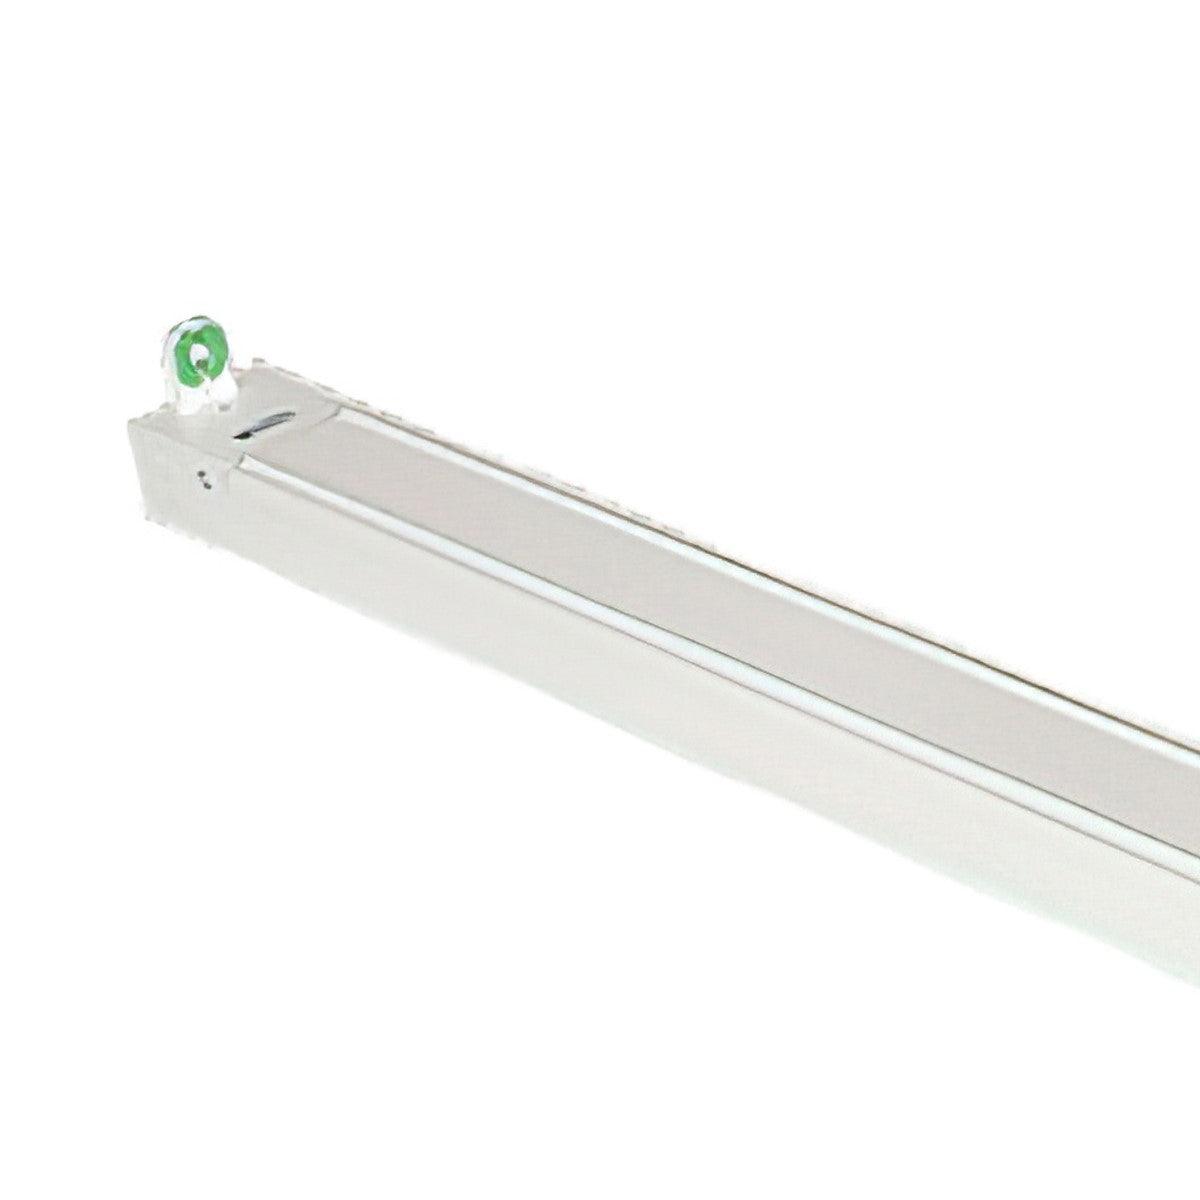 4ft LED Ready Strip Light 1-lamp Double End Wiring LED T5 Bulbs Not Included - Bees Lighting